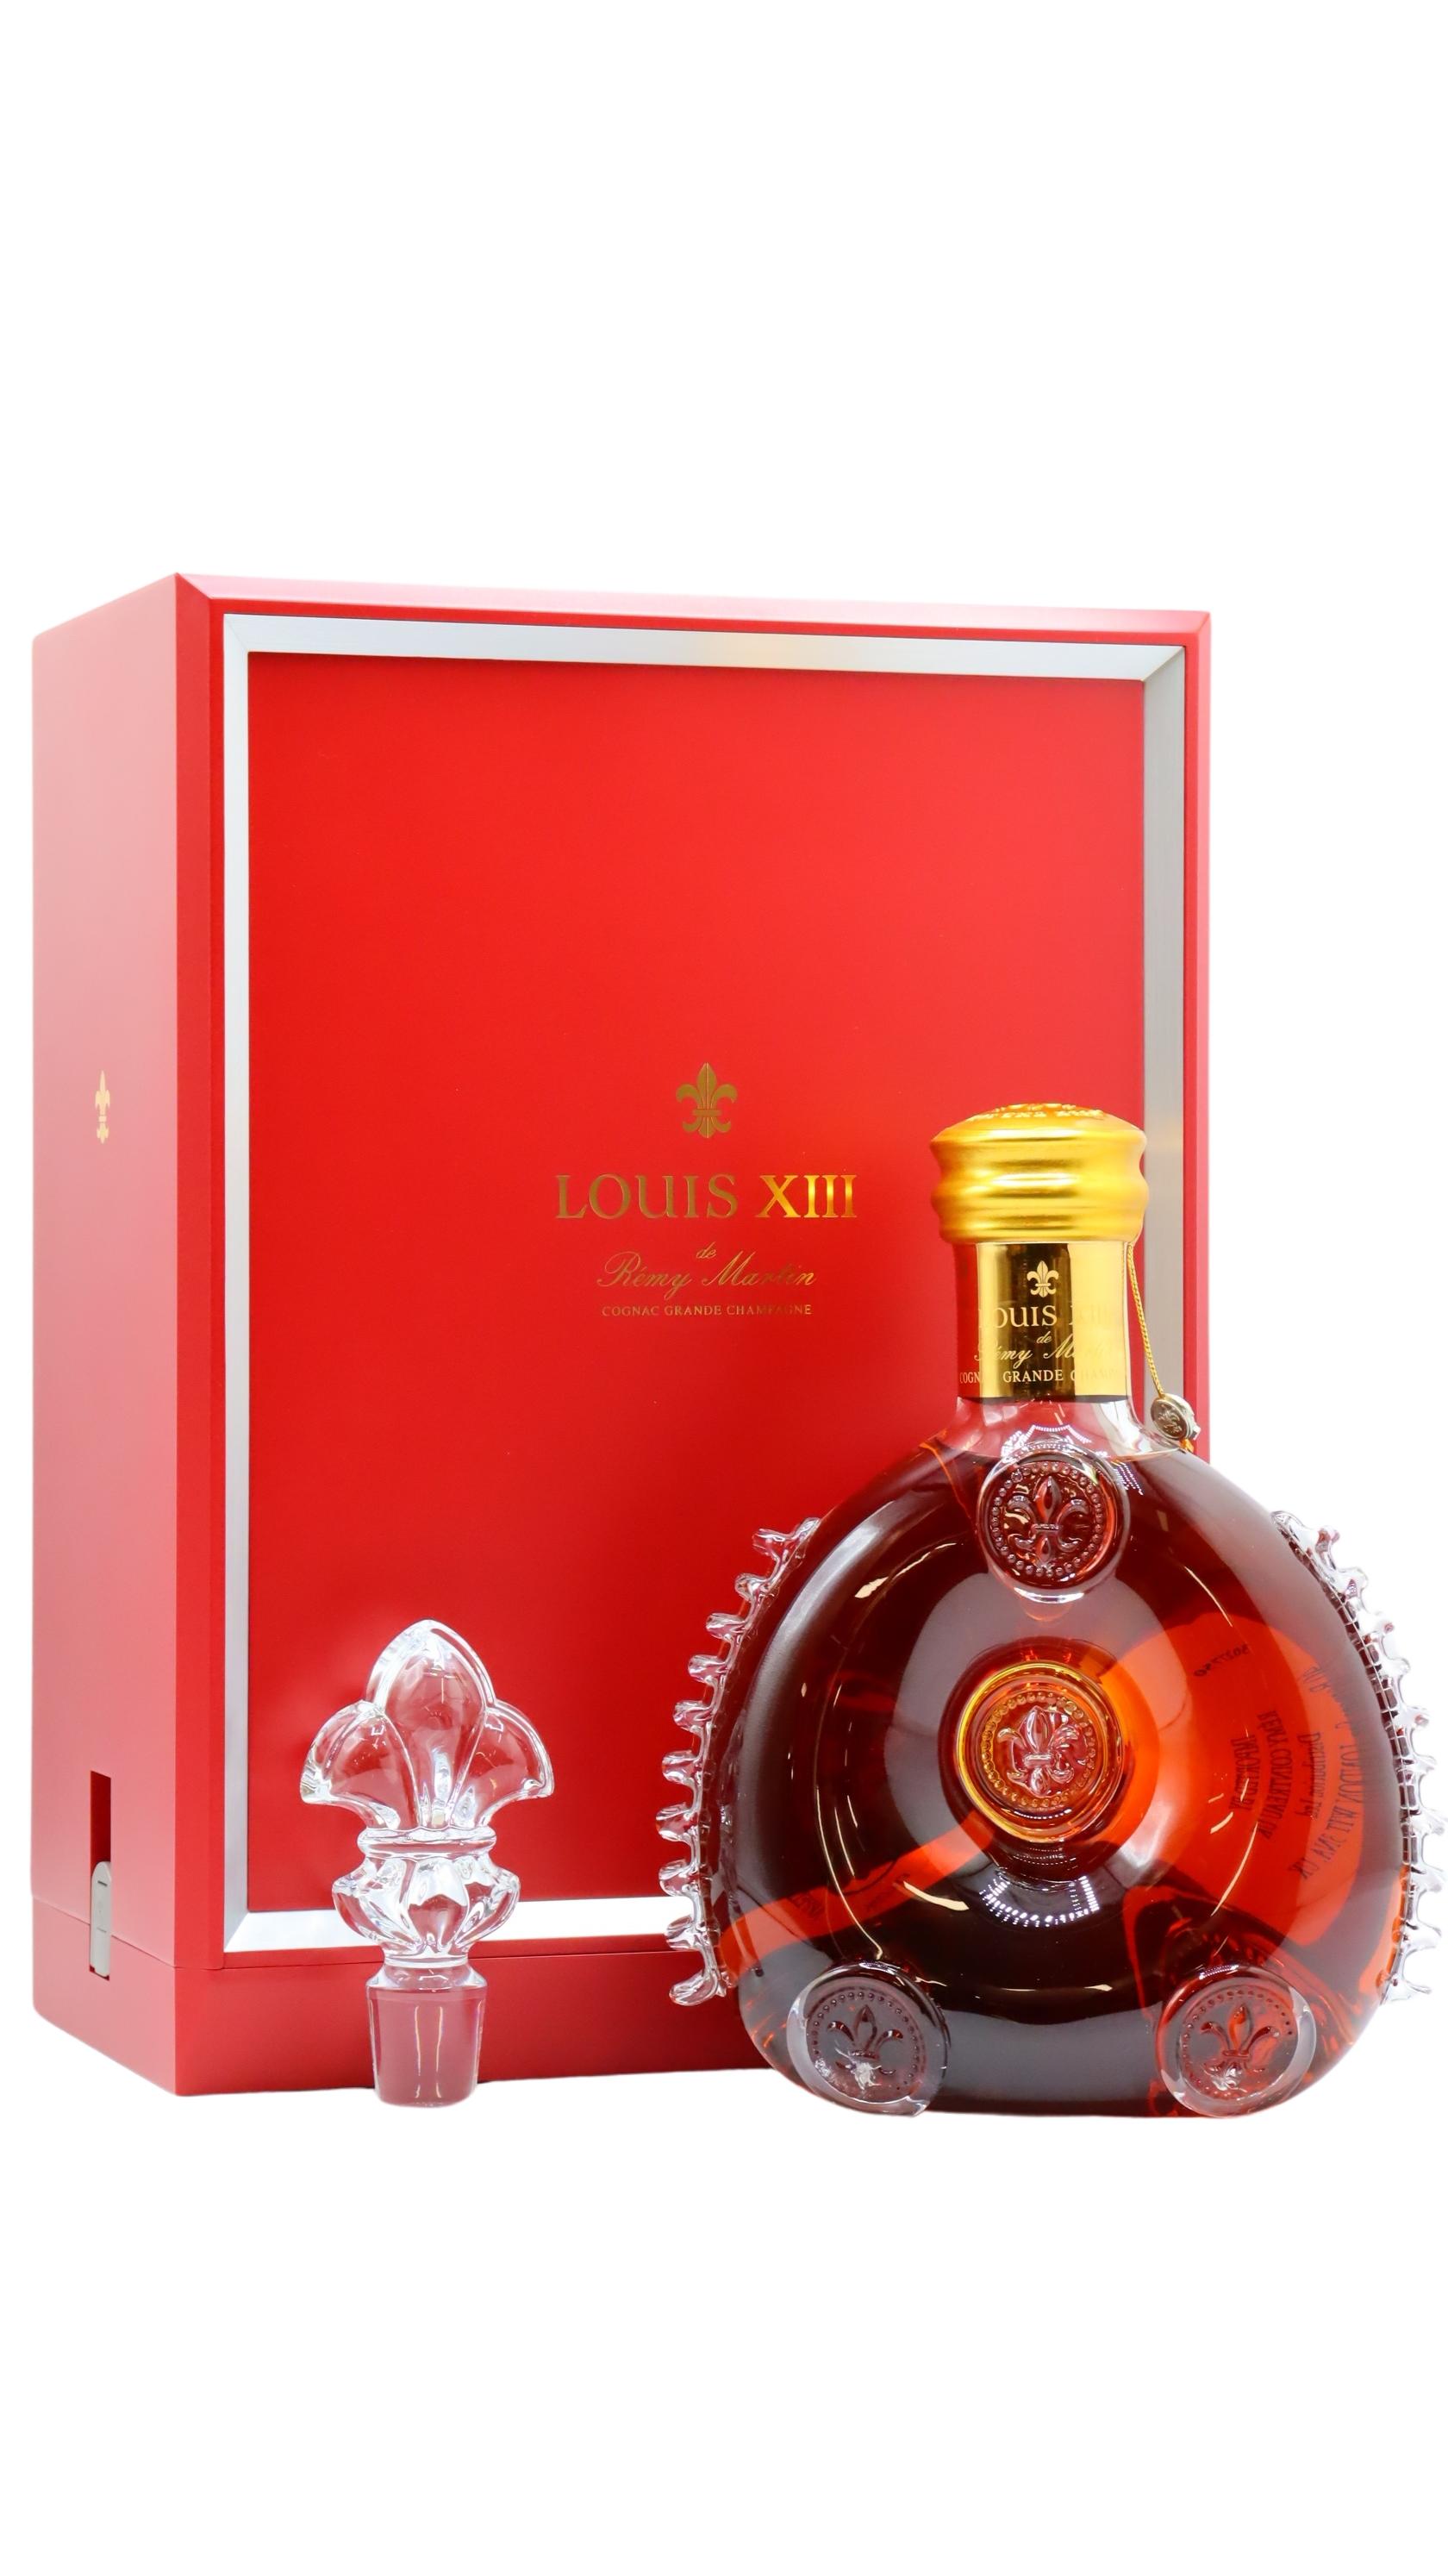 LOUIS XIII REMY MARTIN GRANDE CHAMPAGNE BACCARAT CRYSTAL BOTTLE